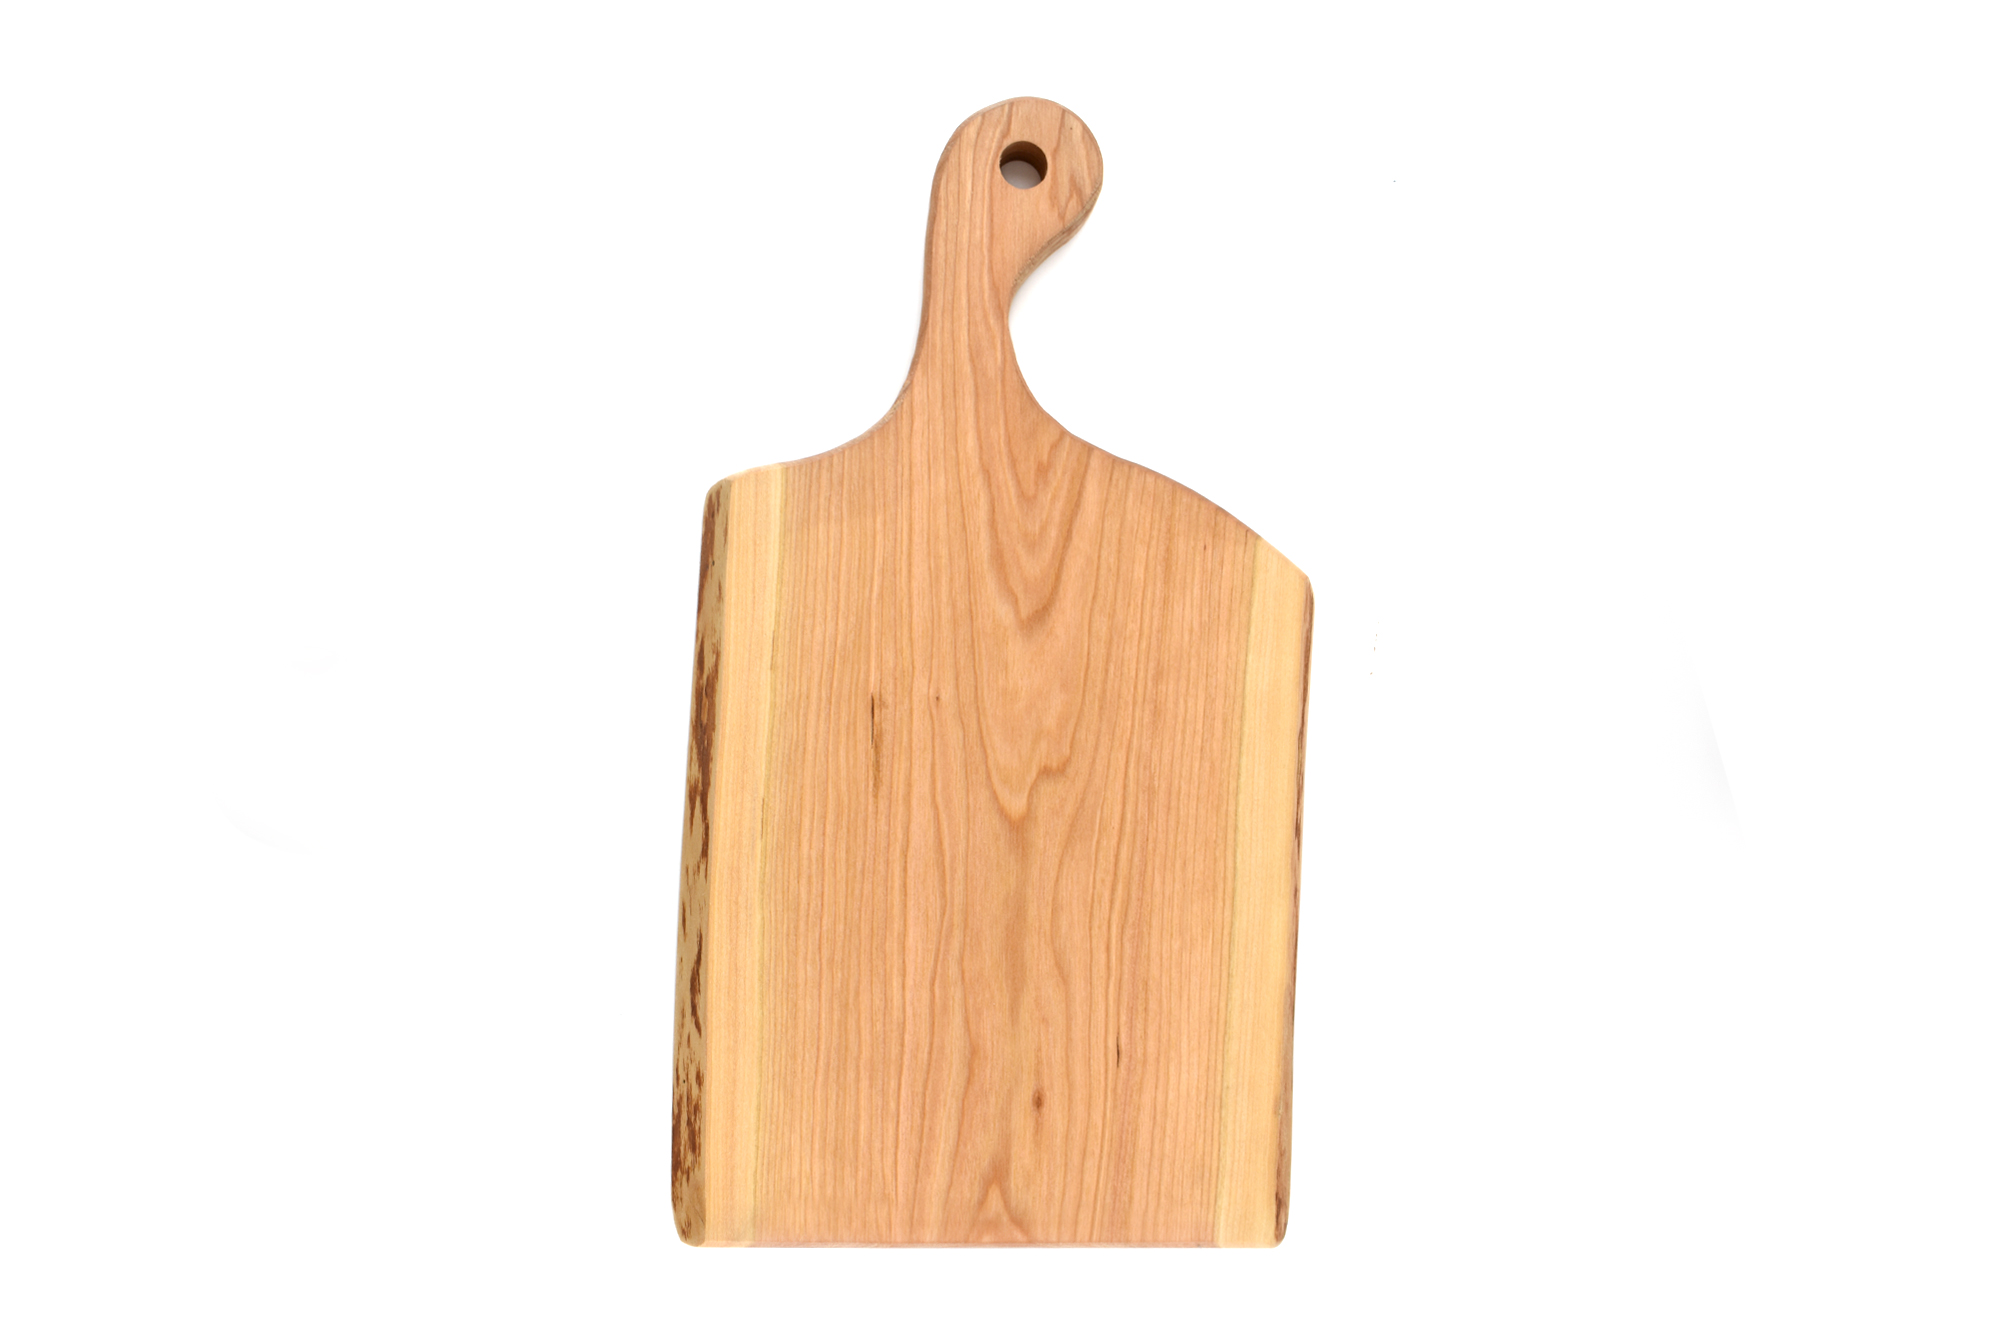 Artisan solid Cherry wood cutting/serving board with curved 4